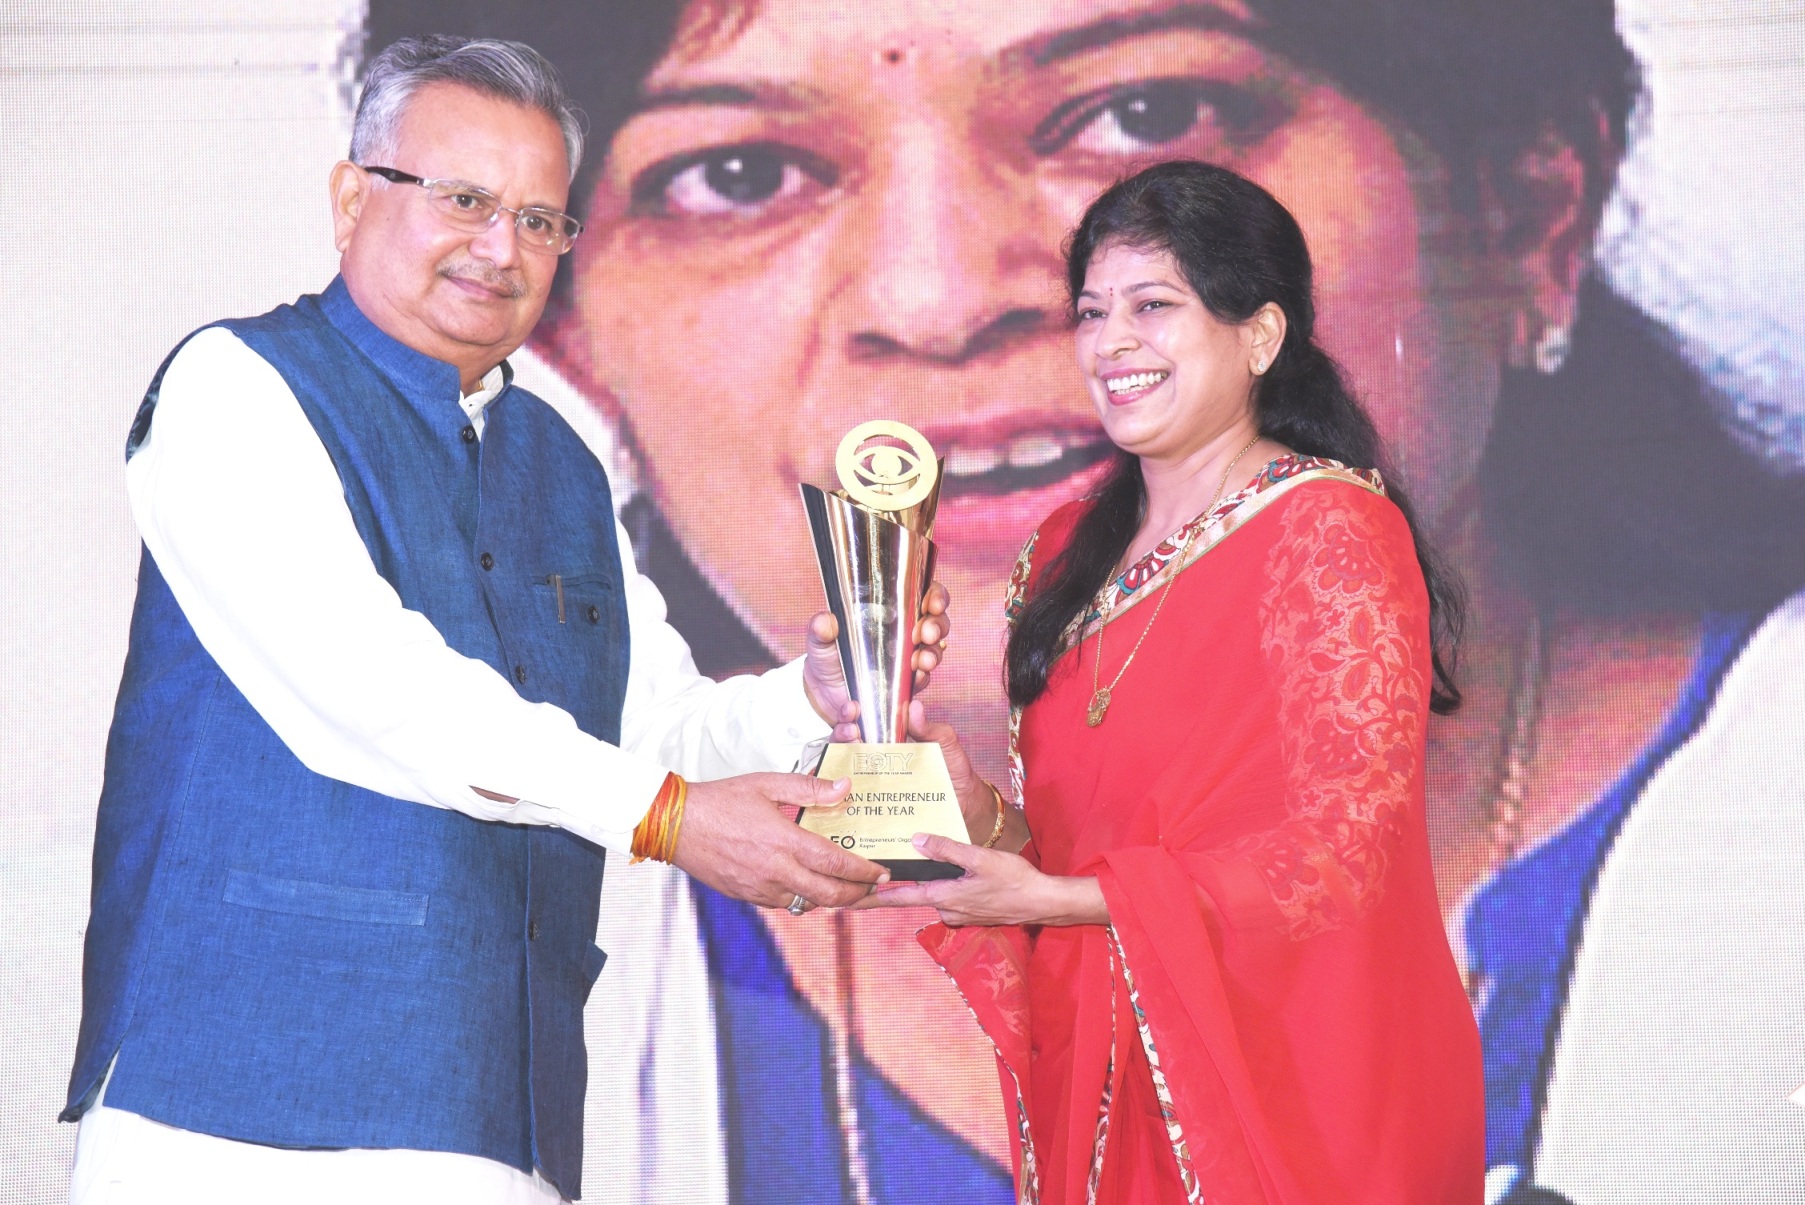 Dr.Raman Singh Awarded Ritu S. Jain, Director of SR Corporate Consultant Private Limited with Woman Entrepreneur of the Year Award.